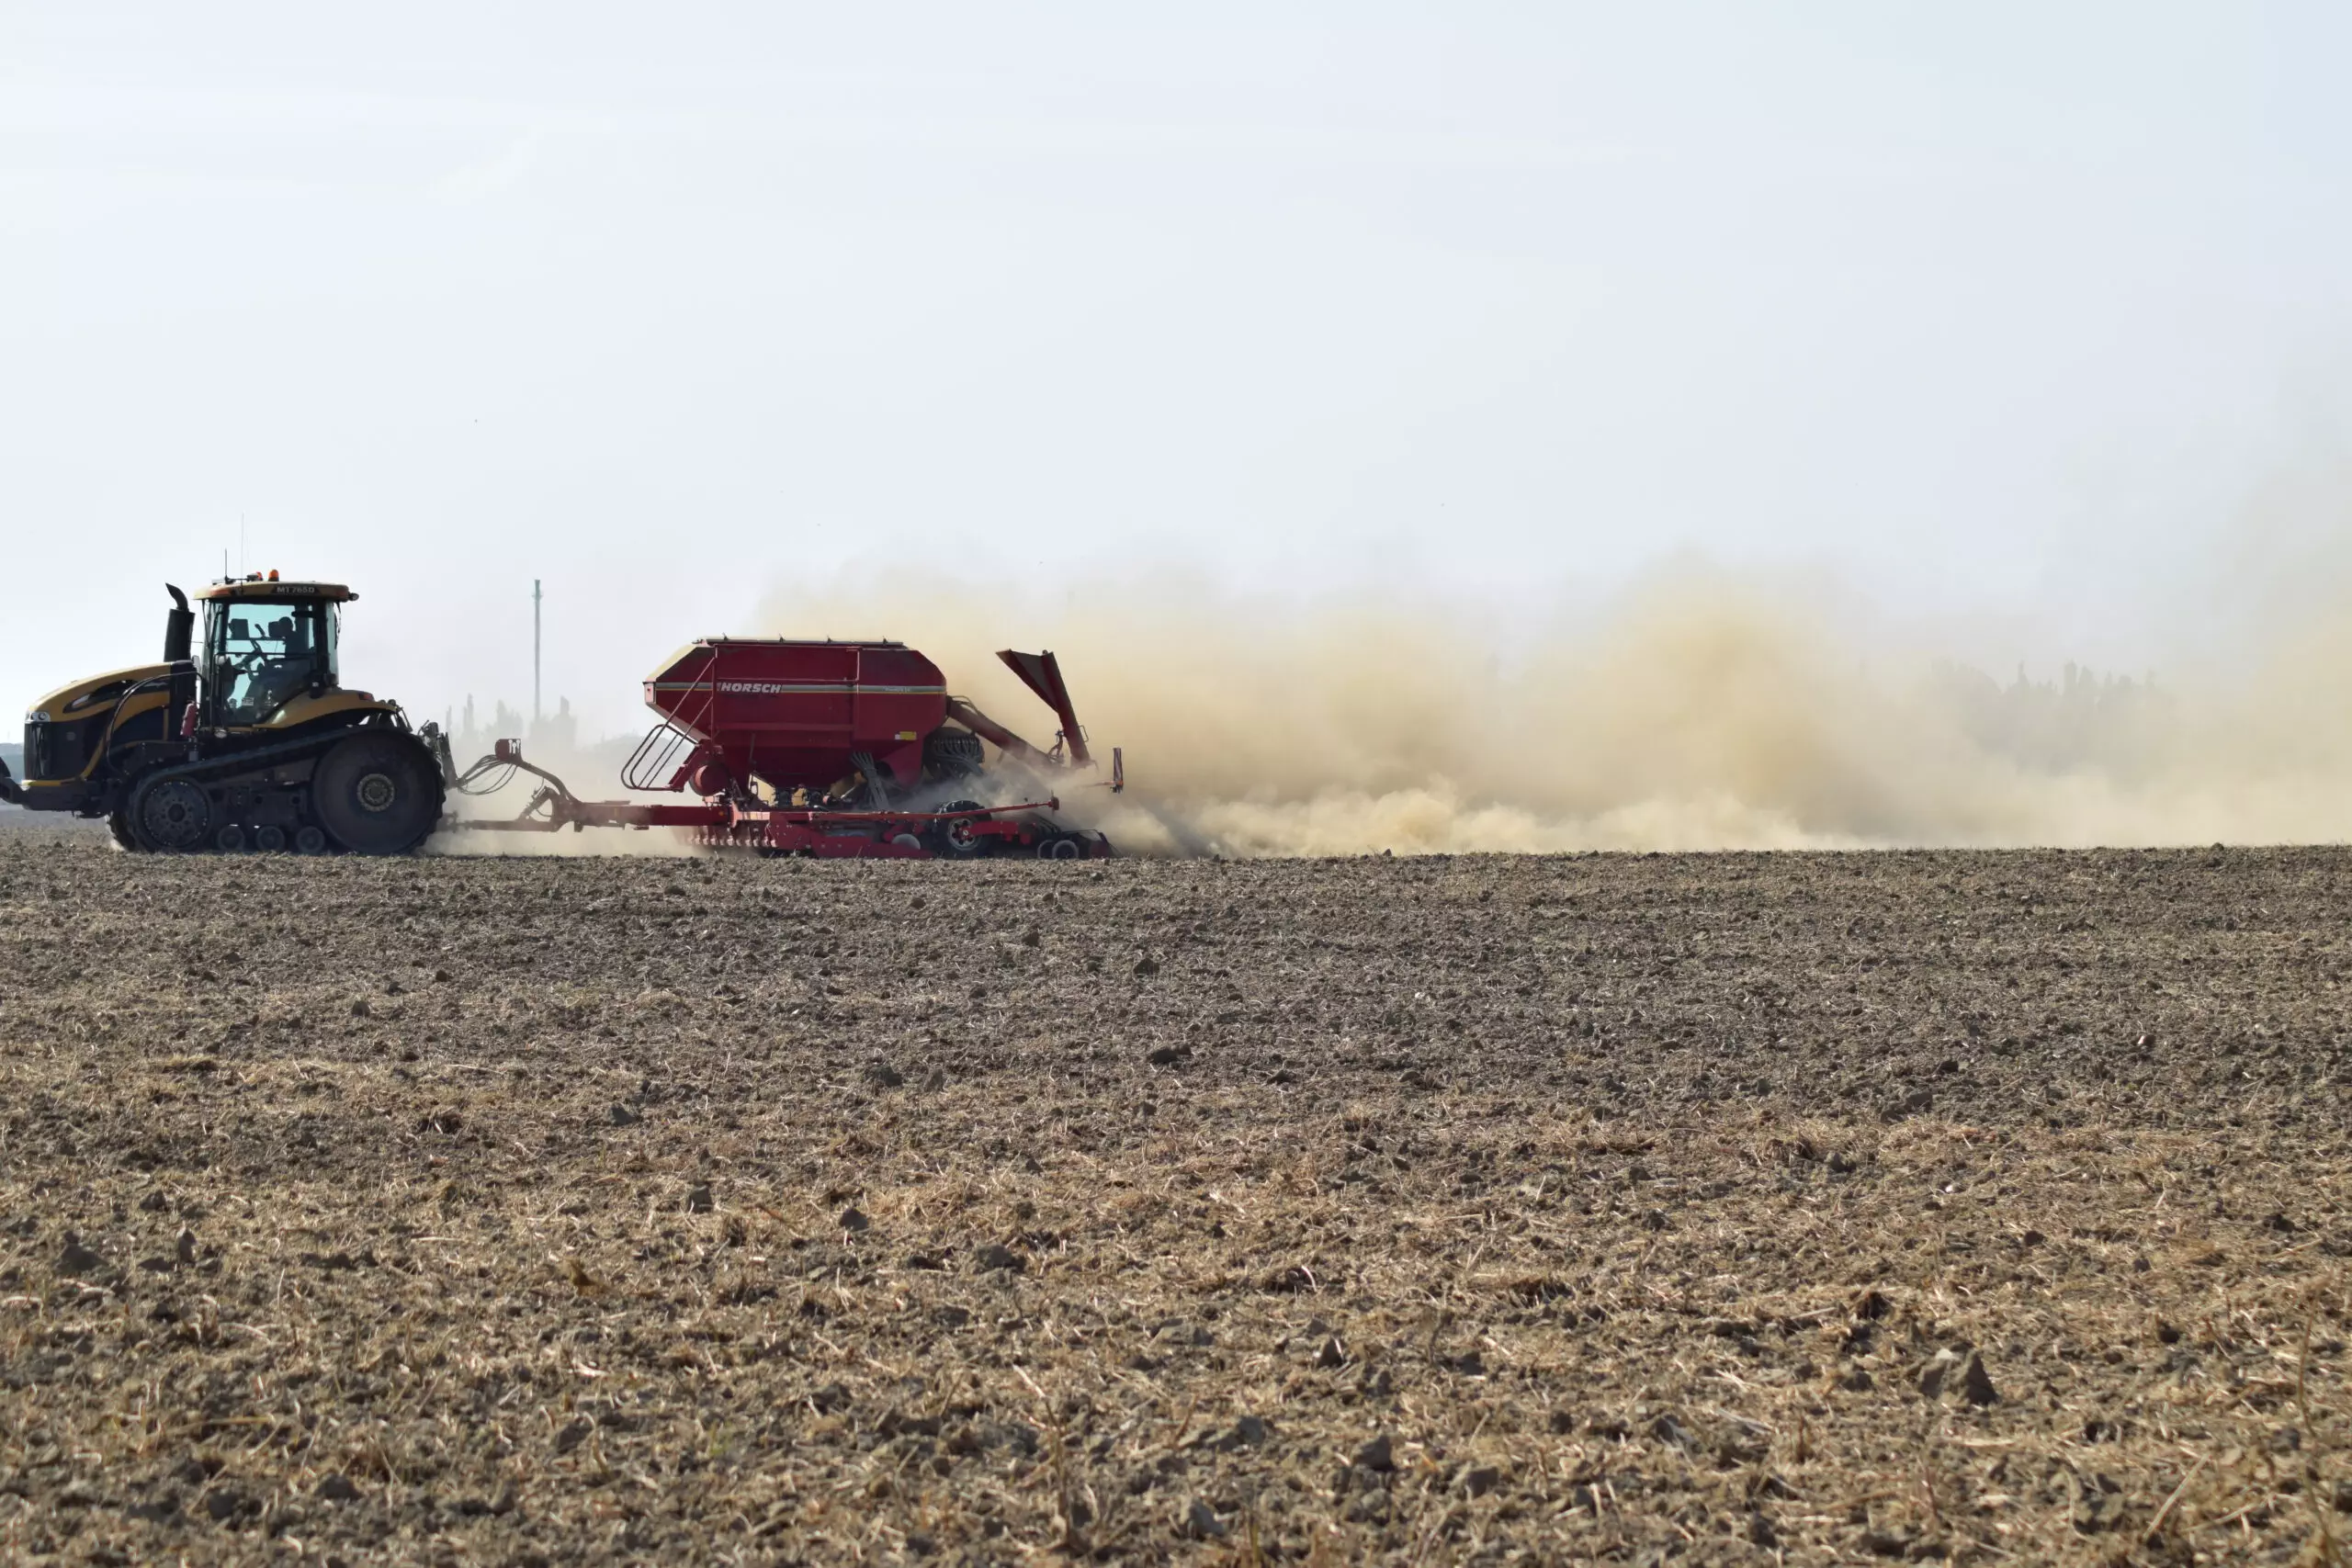 Tractor plowing field with dust cloud.